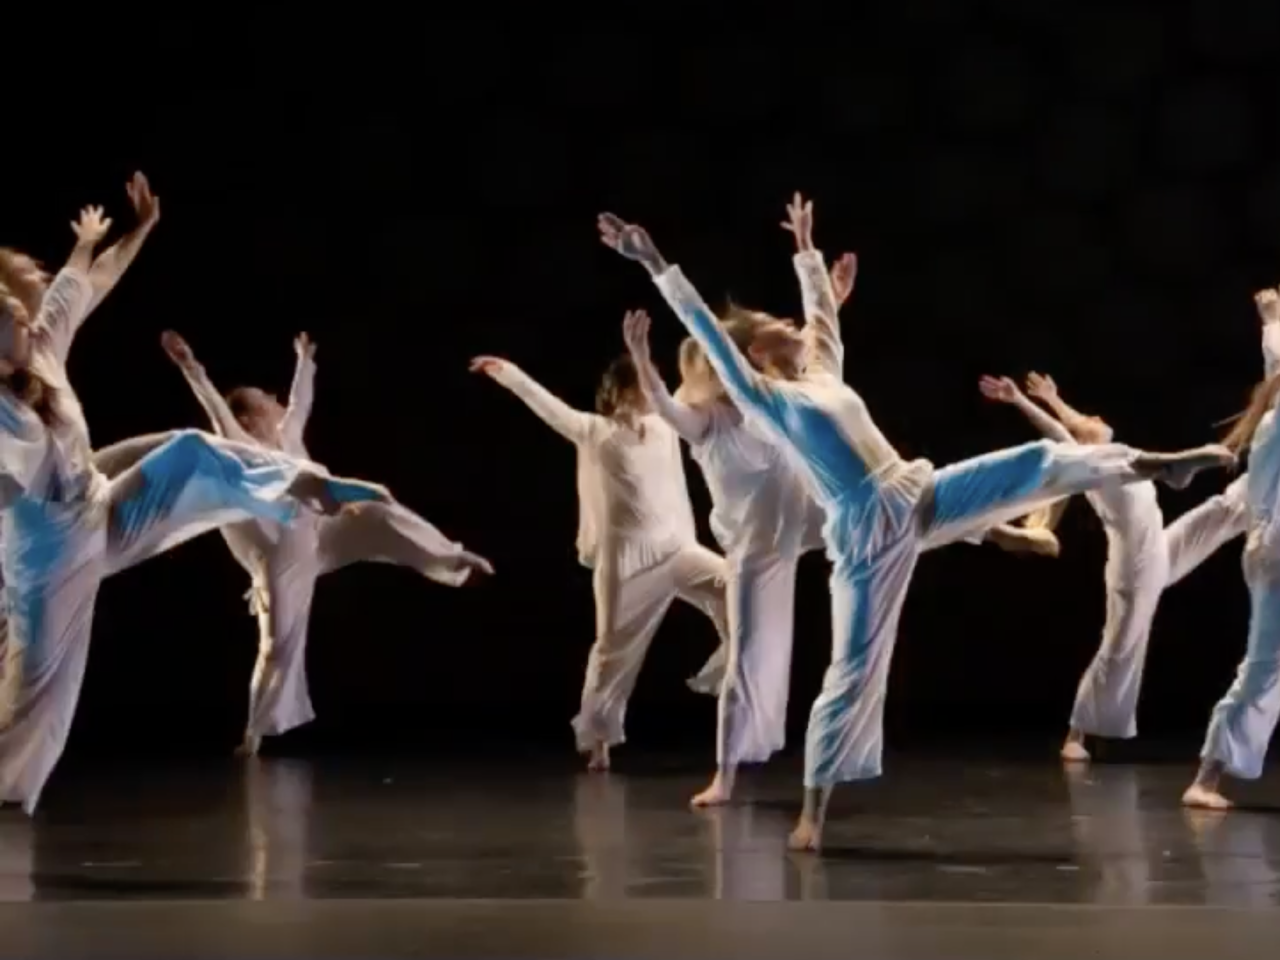 Dancers in white on a stage